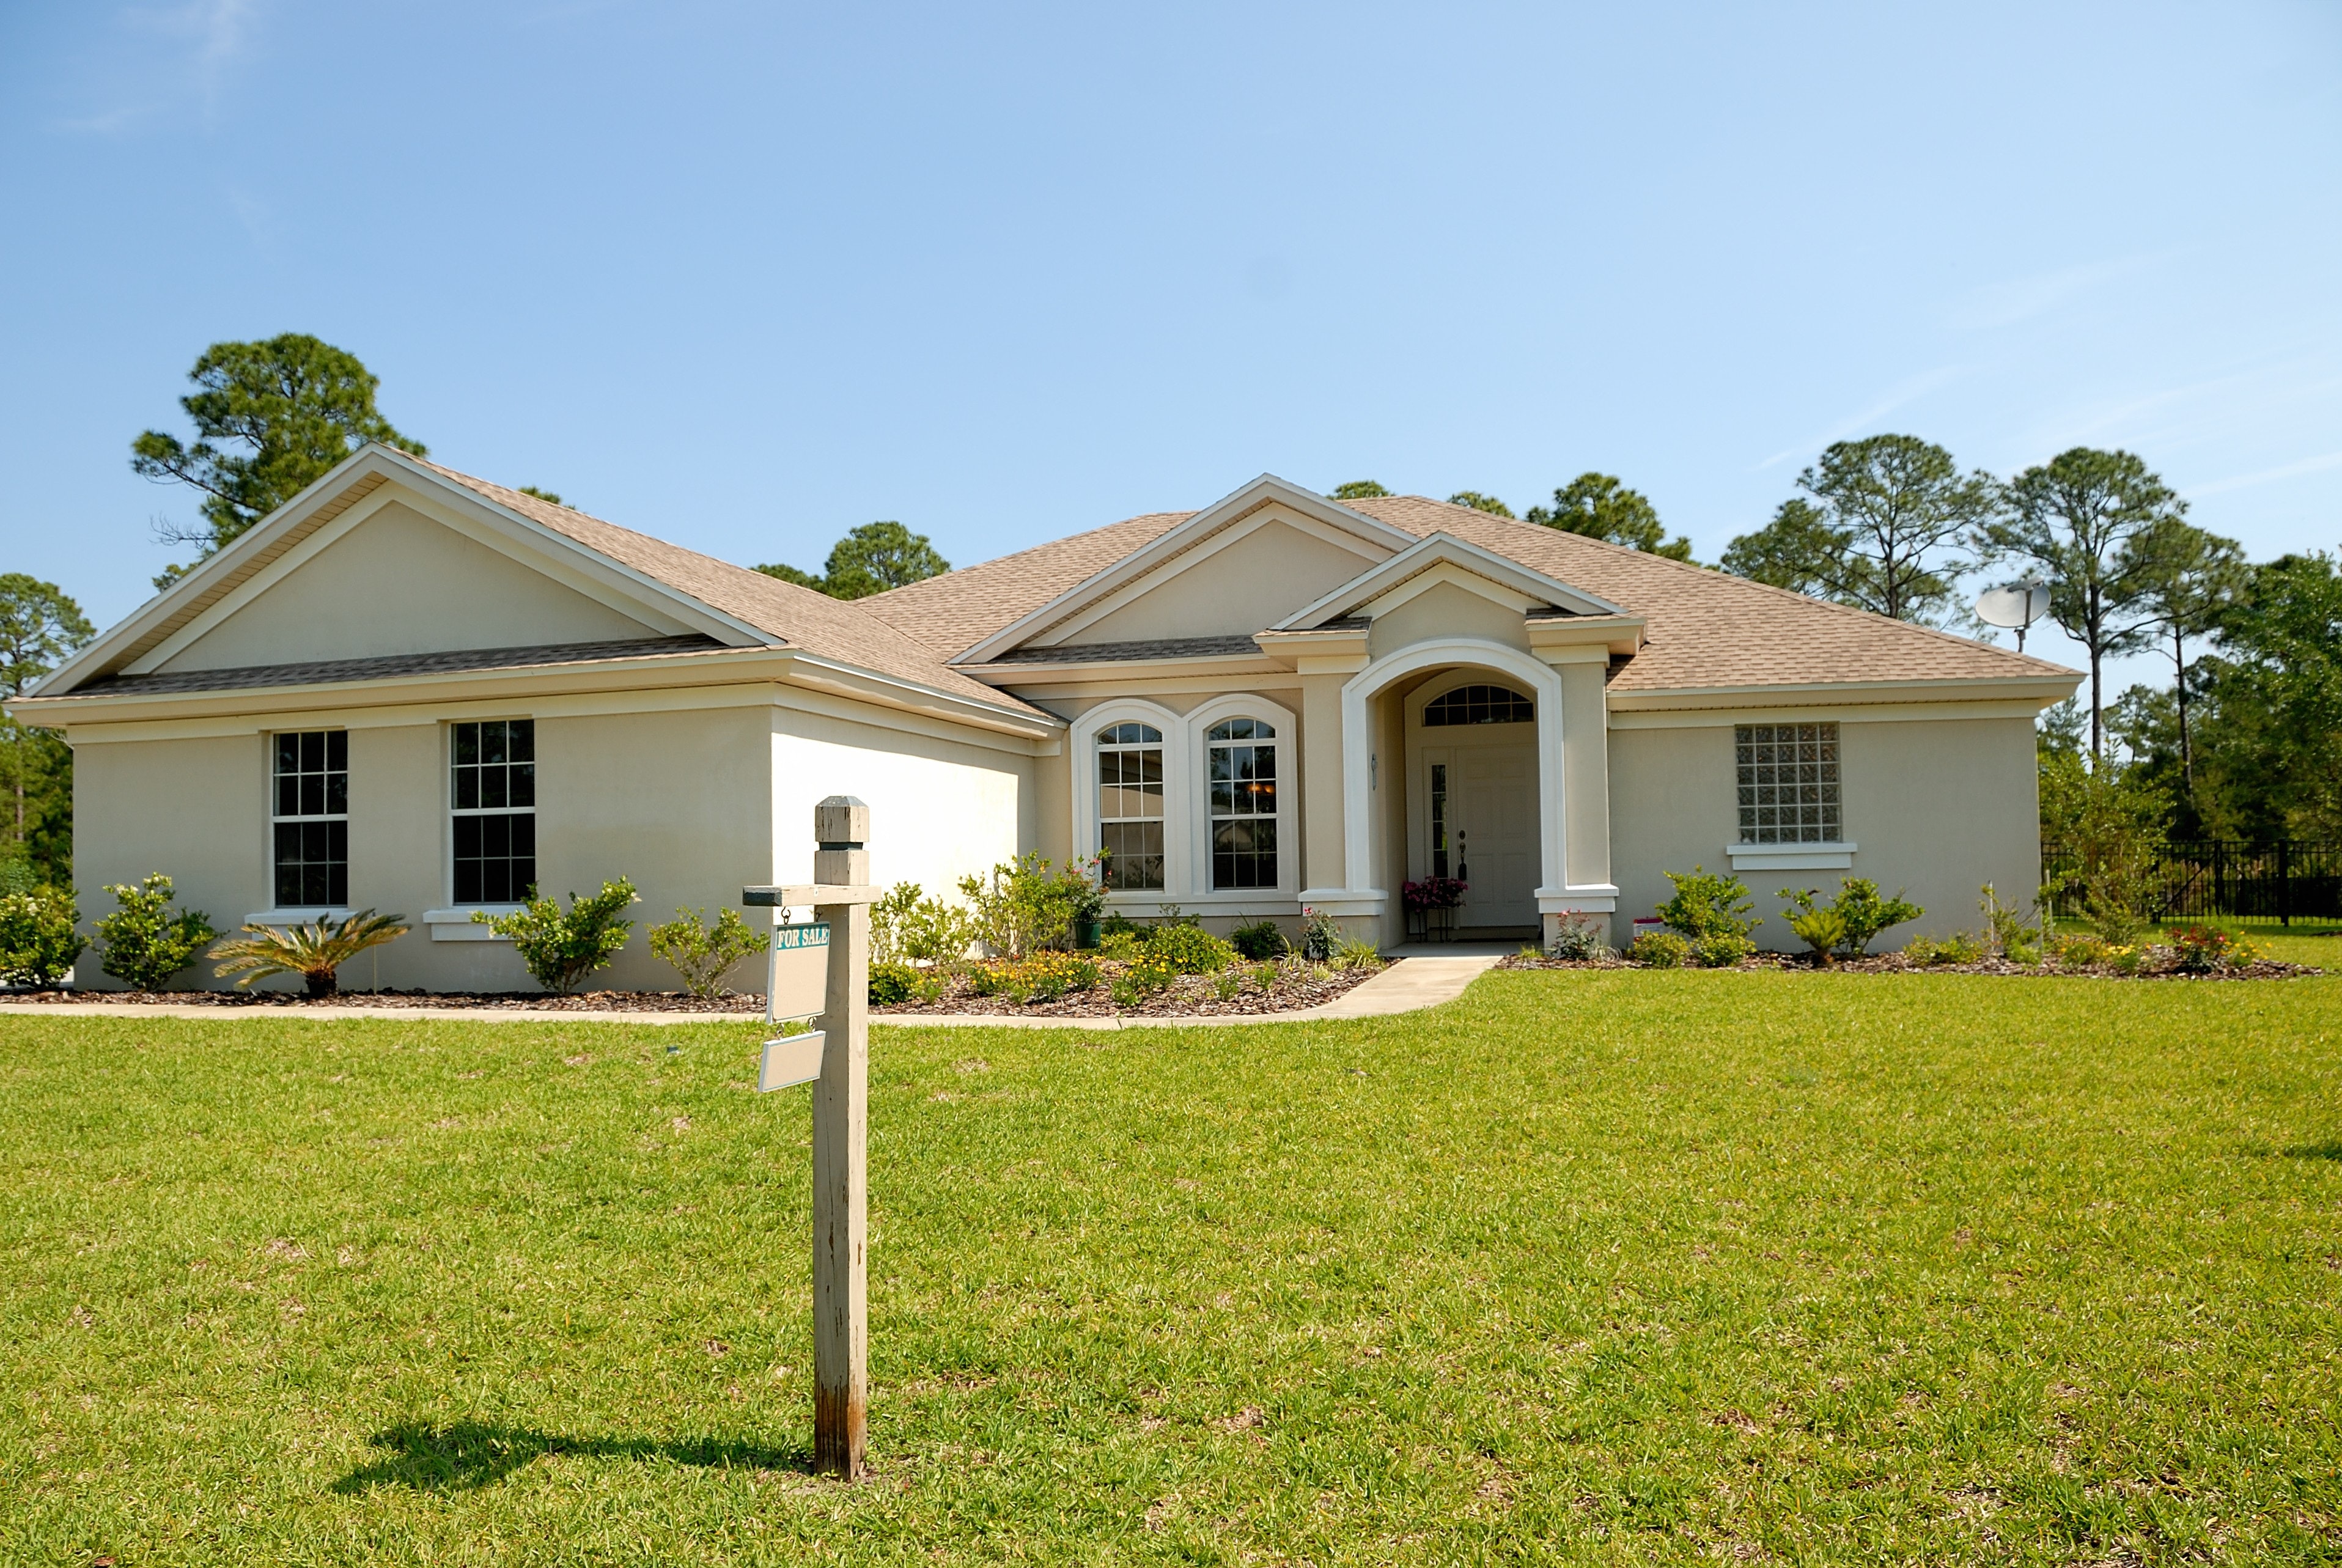 How to Legally Wholesale Real Estate in Florida